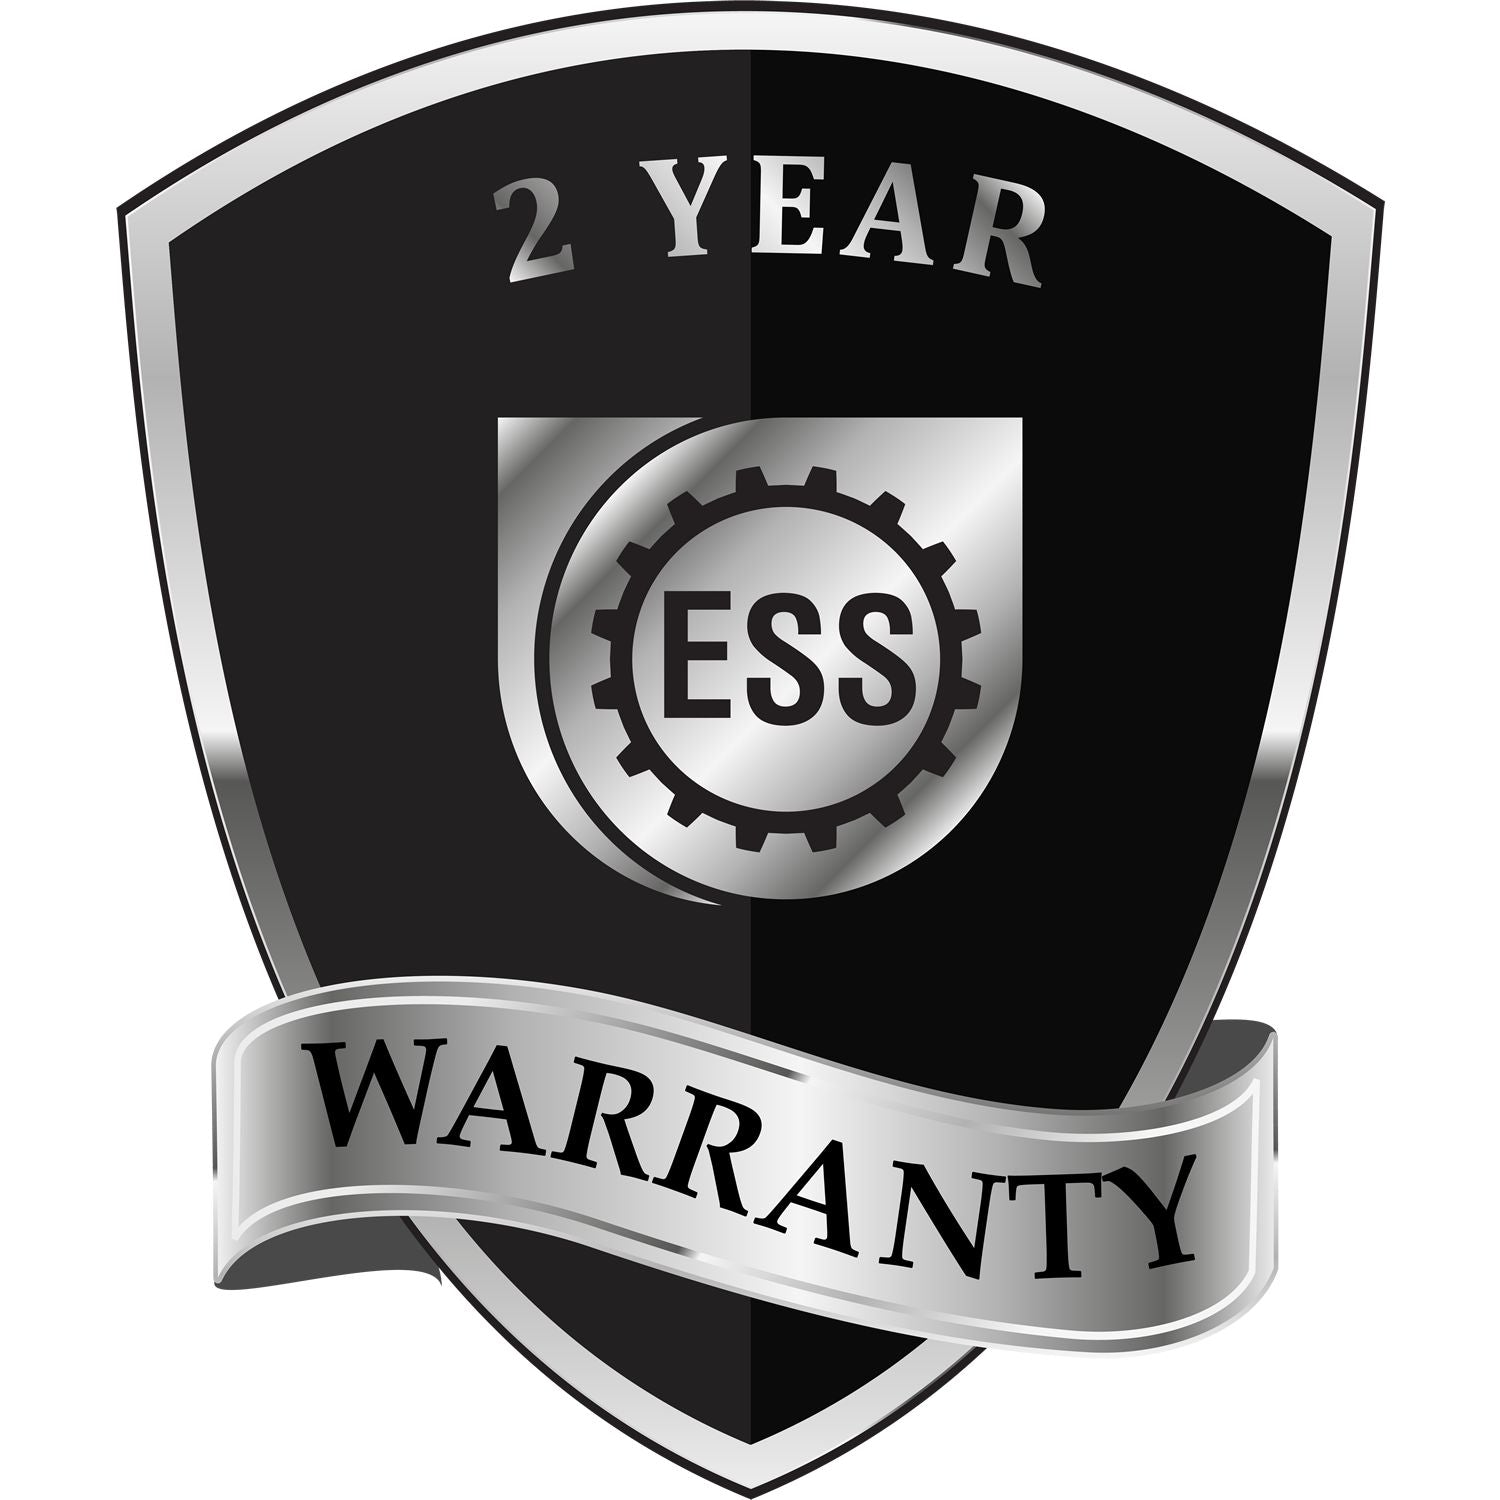 A badge or emblem showing a warranty icon for the Long Reach New York Land Surveyor Seal